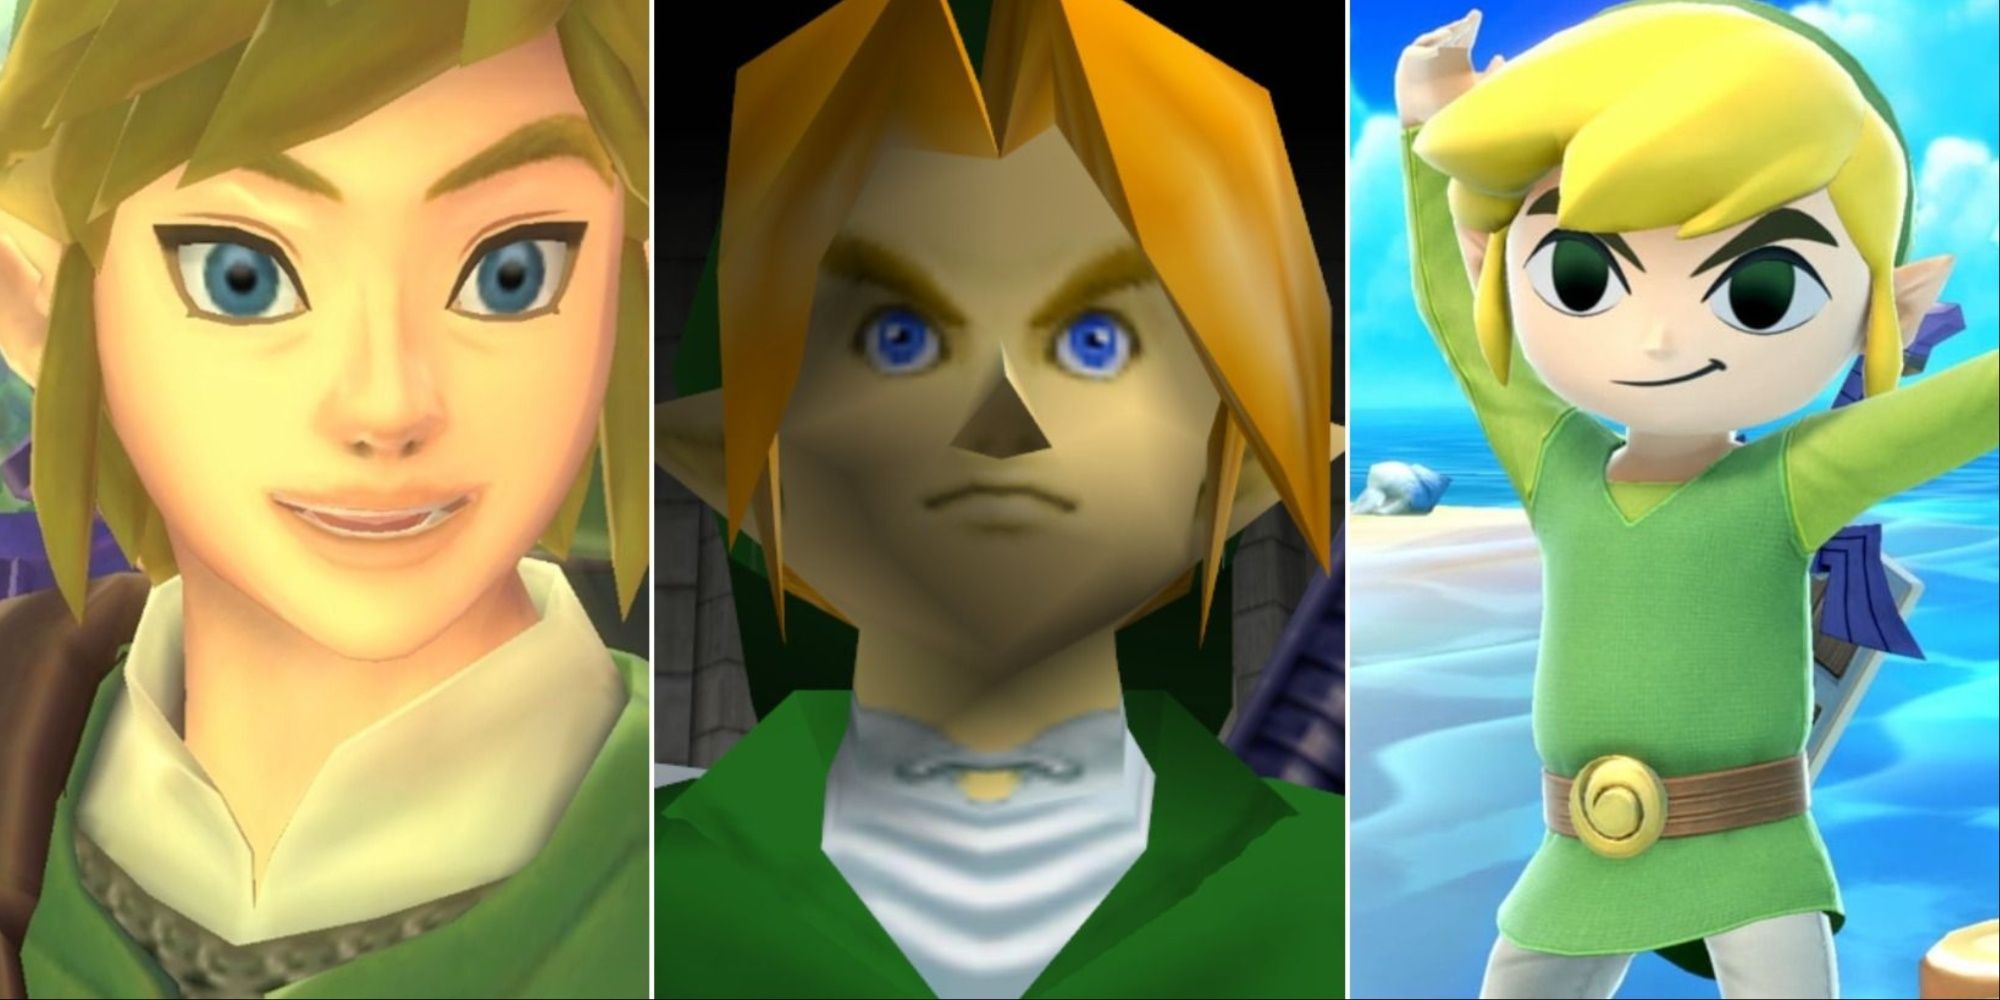 Three versions of Link side by side with different styles